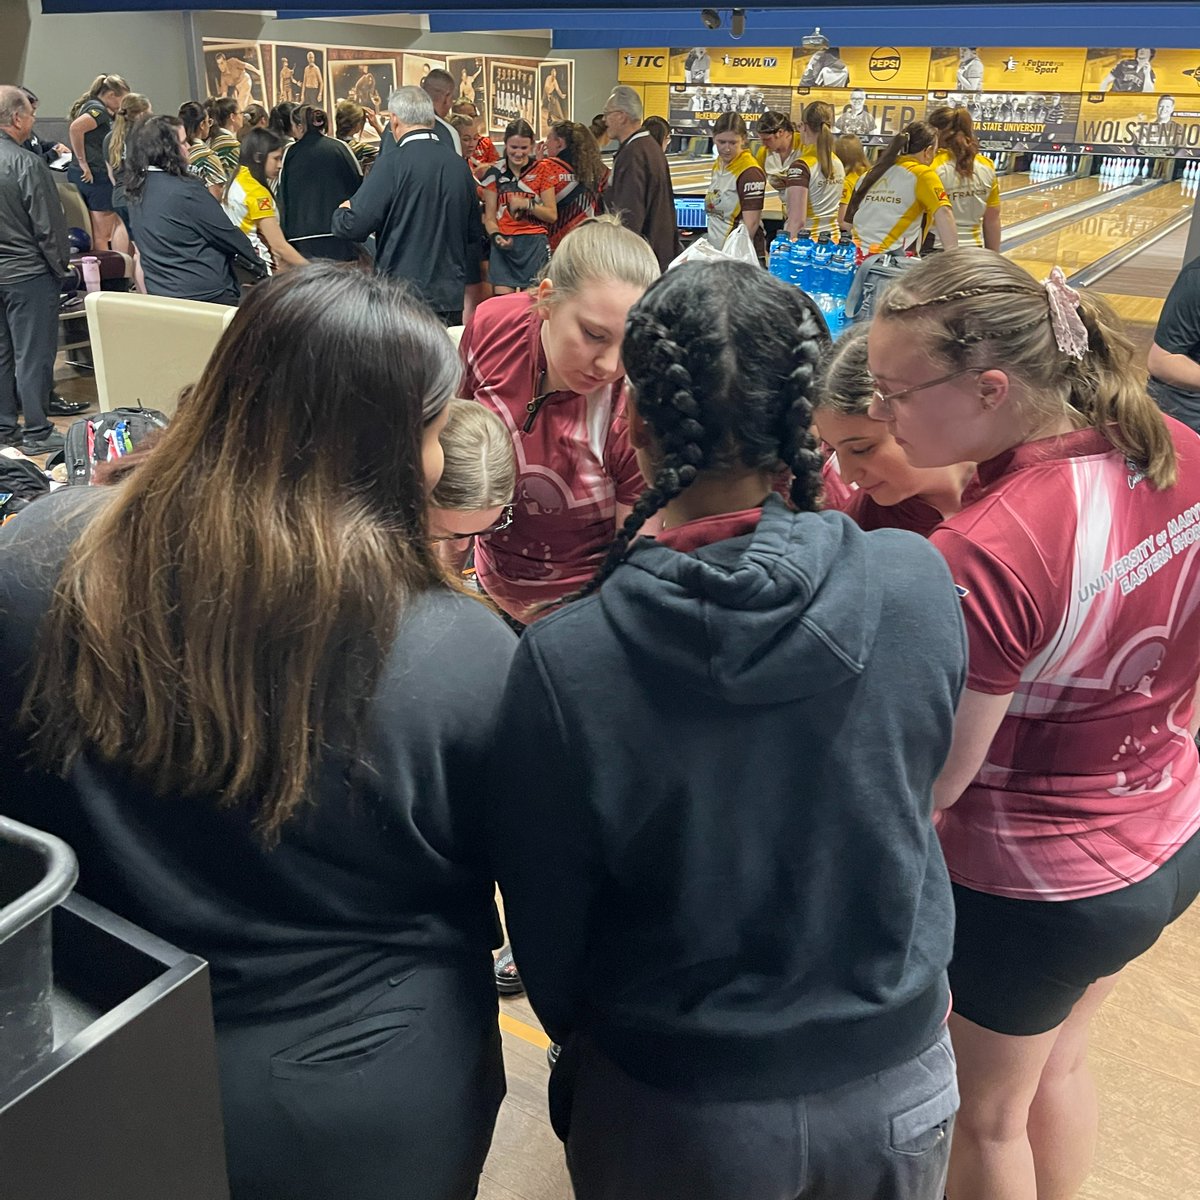 The UMES Bowling team kicks off the 2024 USBC National Championship with 24 Baker games to determine seeding for the bracketed portion later today! #HawkPride